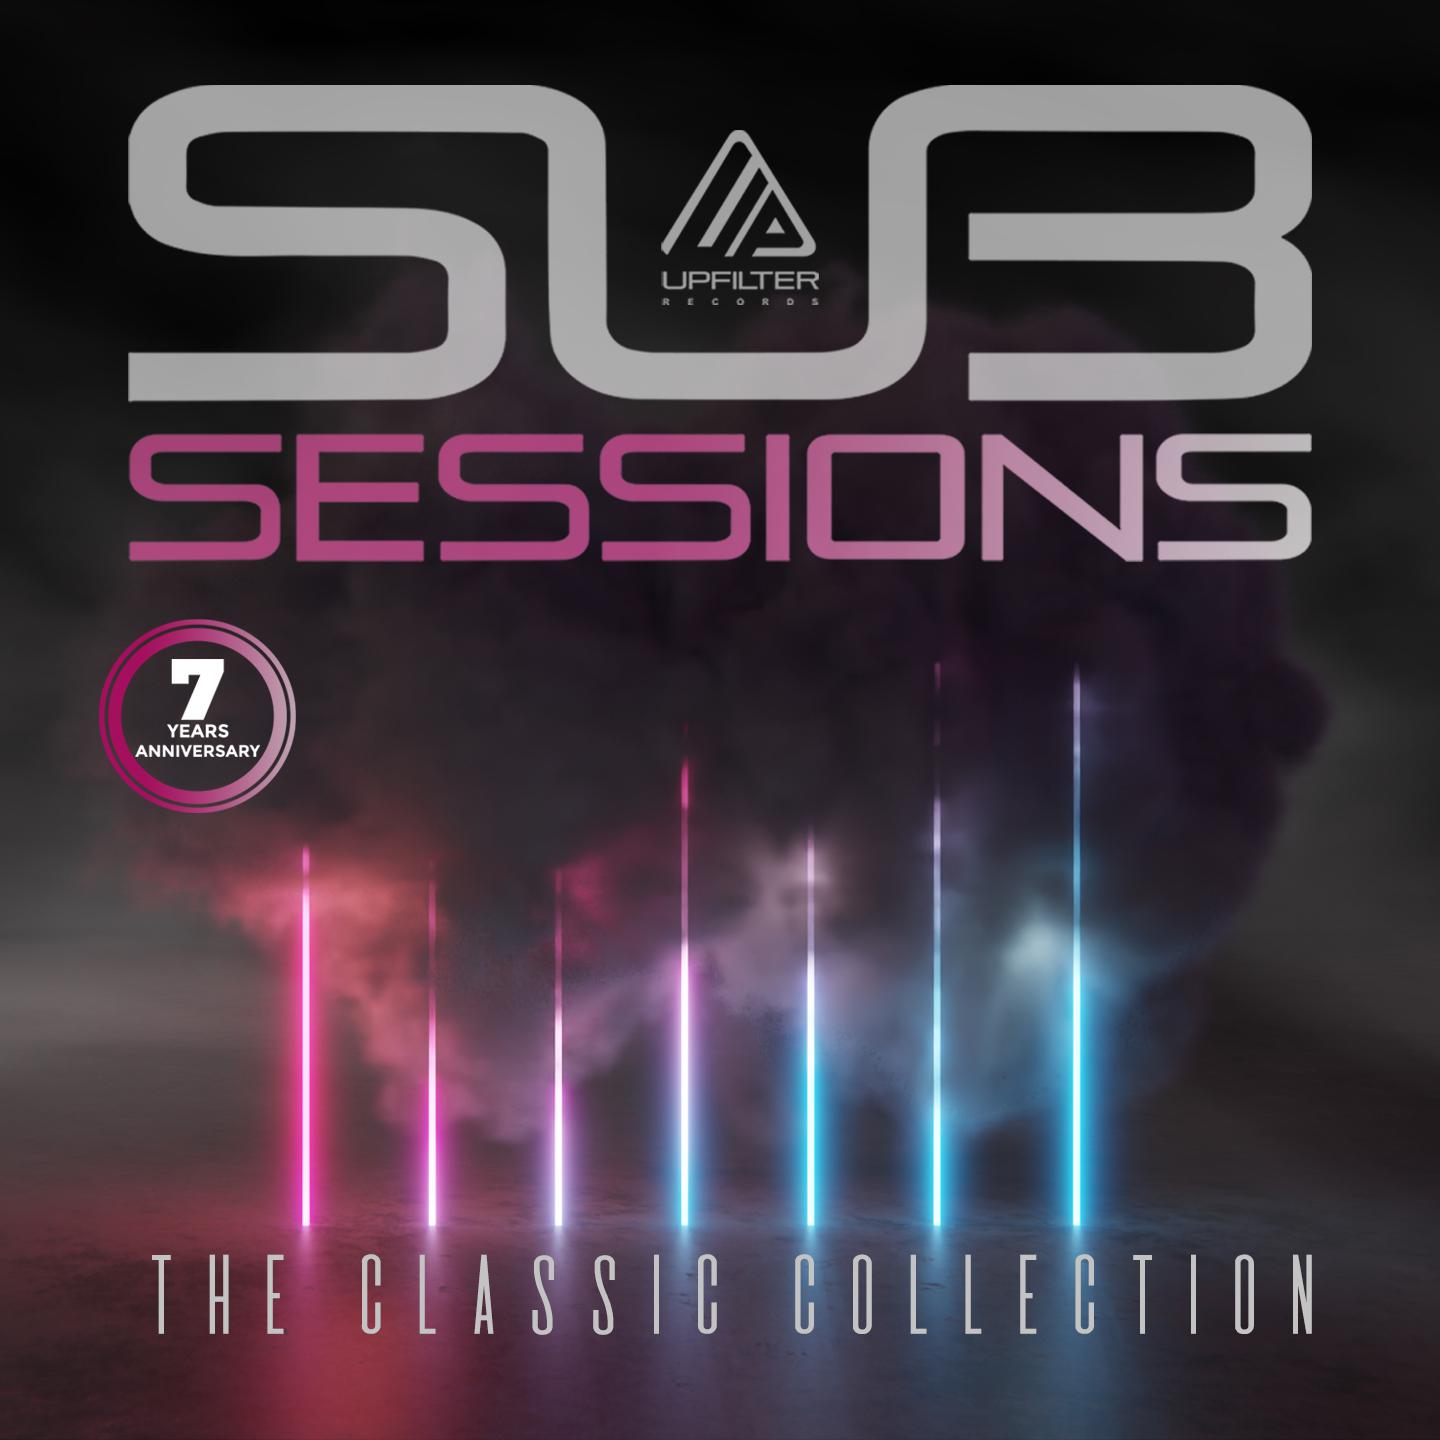 Постер альбома SUB SESSIONS "The Classic Collection"